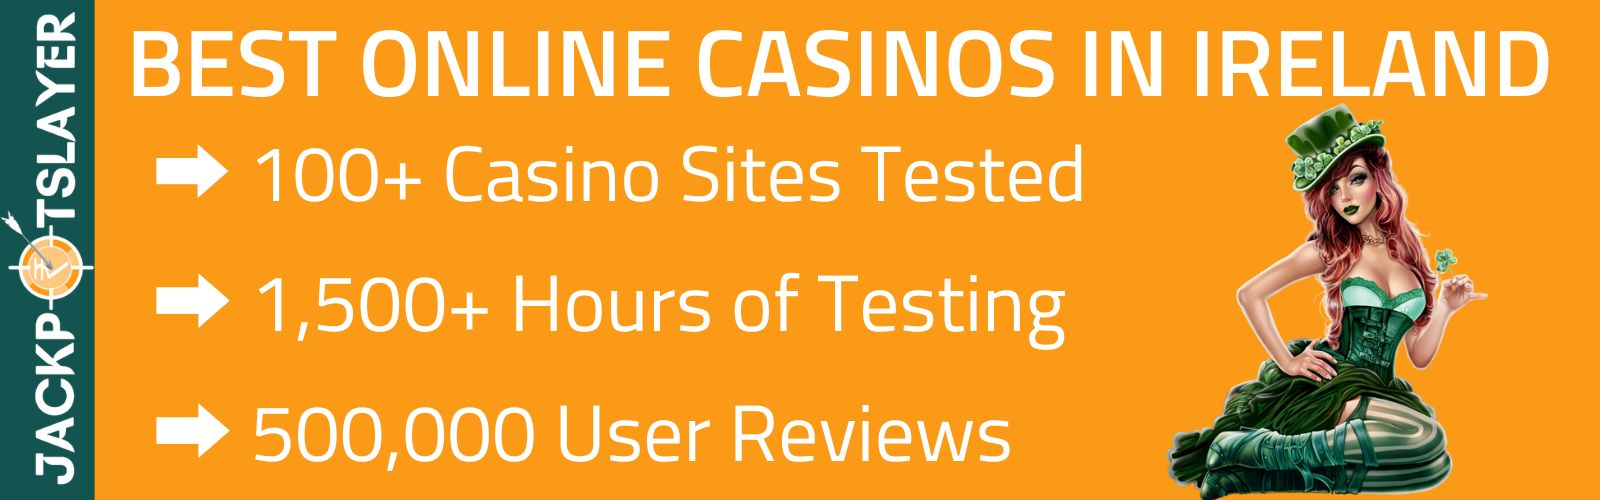 More on Making a Living Off of Irish online casino